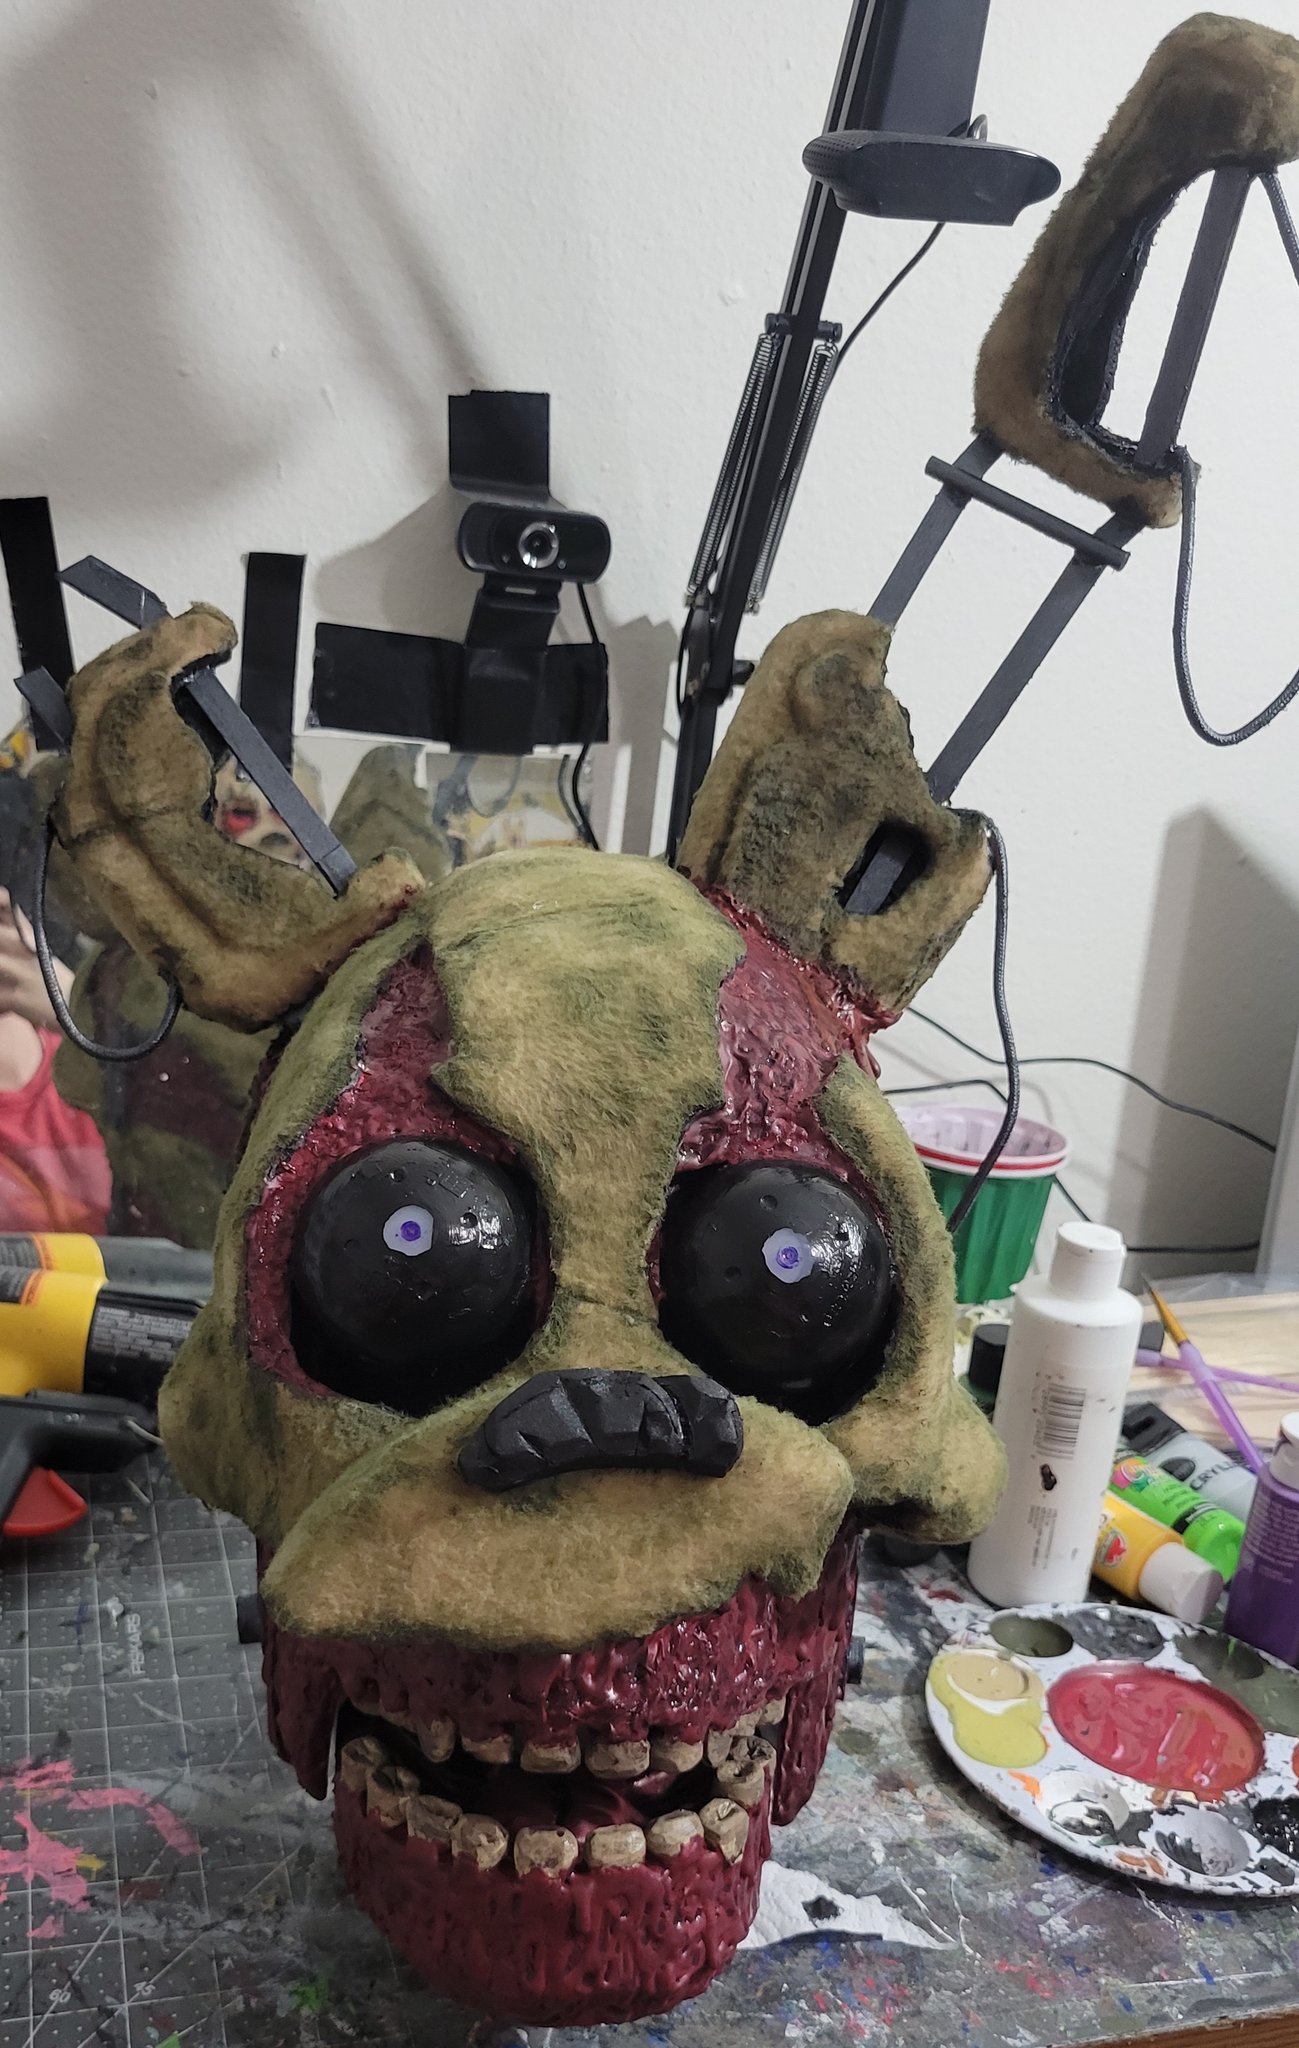 Sky~ They/Them Twitter: "Almost done! #BurntTrap #cosplay #mask #springtrap #fnaf #fnafsecuritybreach #SecurityBreach https://t.co/LZKLwAMuHH" Twitter